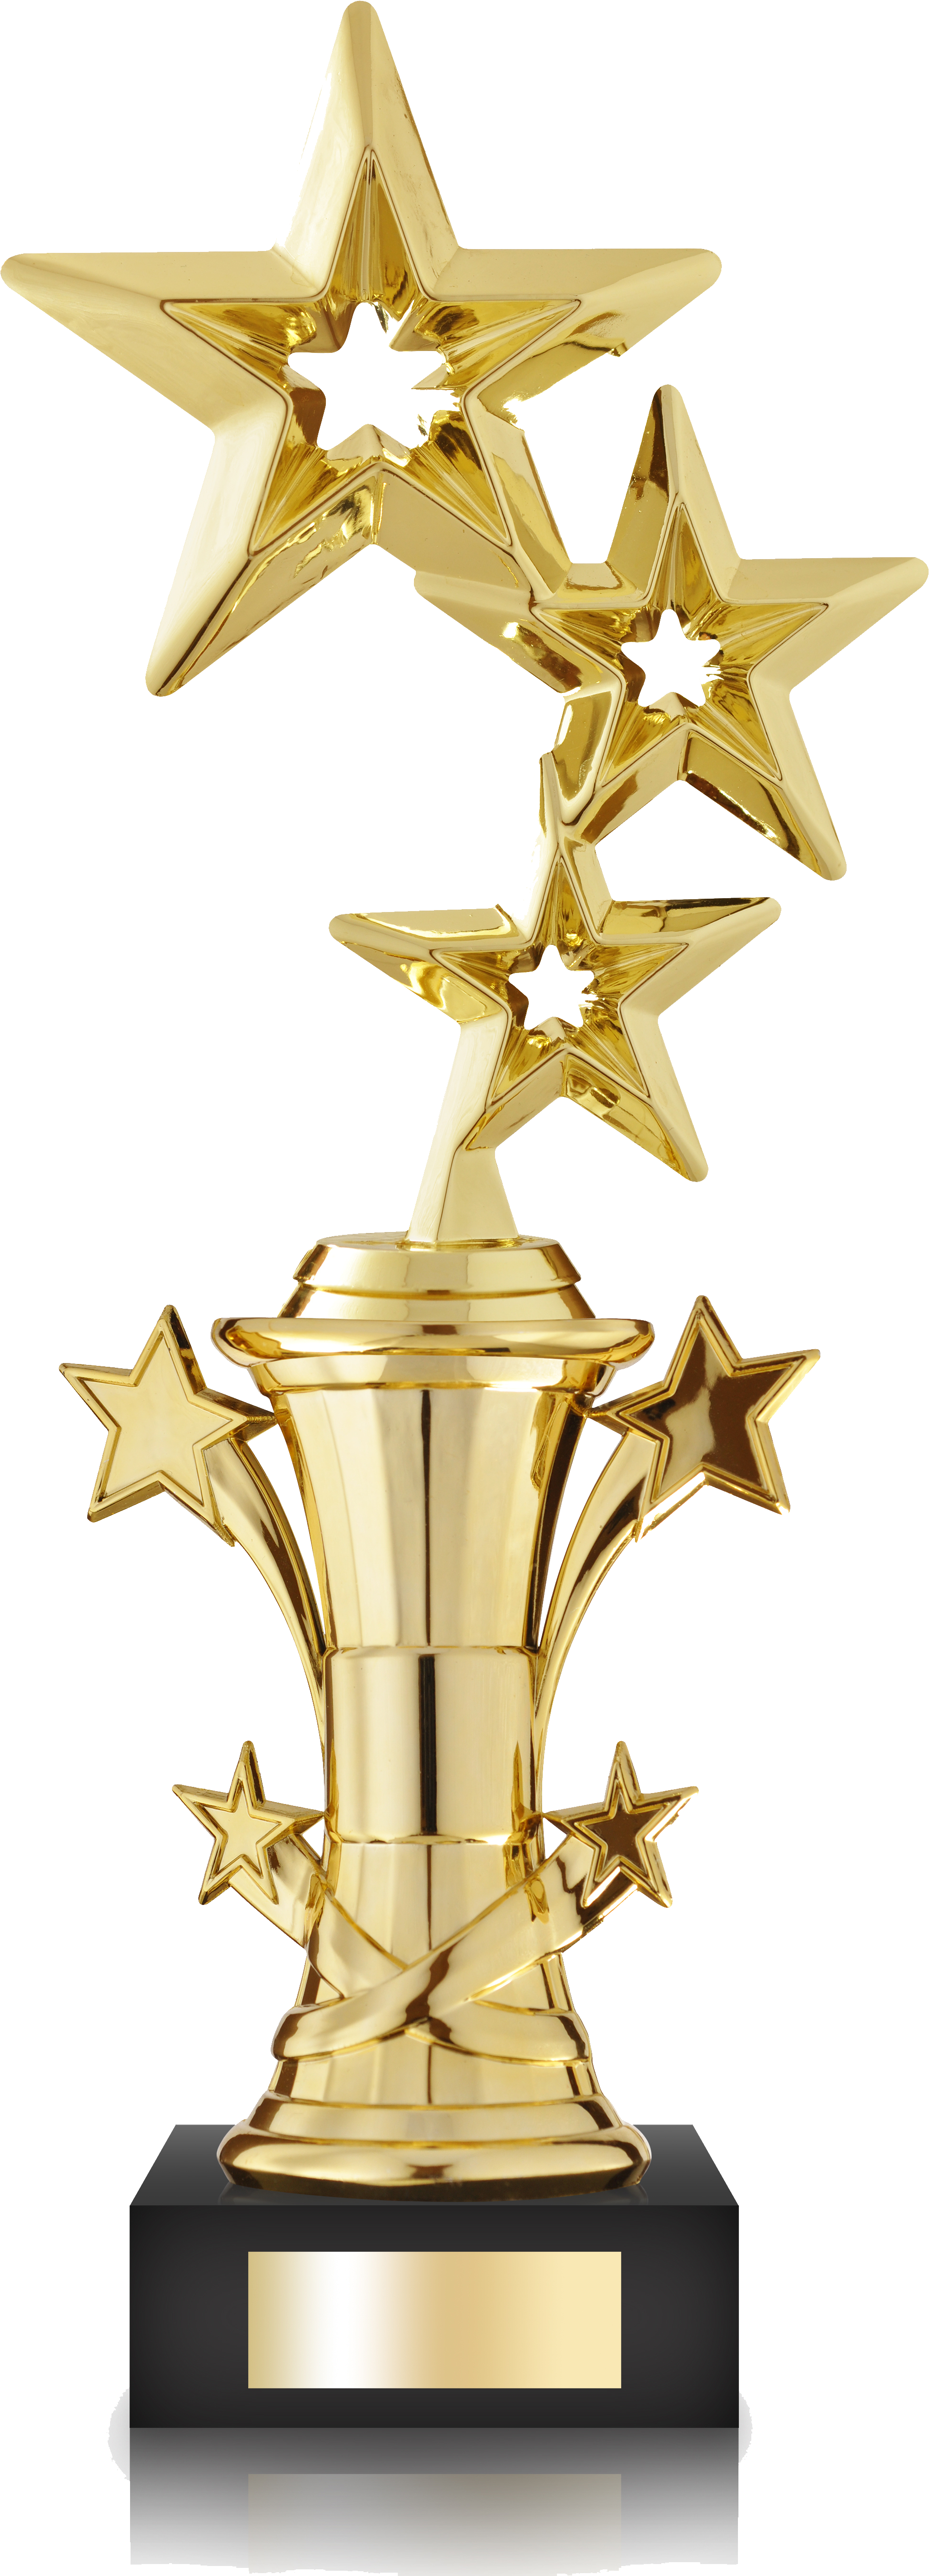 Gold Trophy With Multiple Stars - Transparent Star Trophy Png (1978x5443)